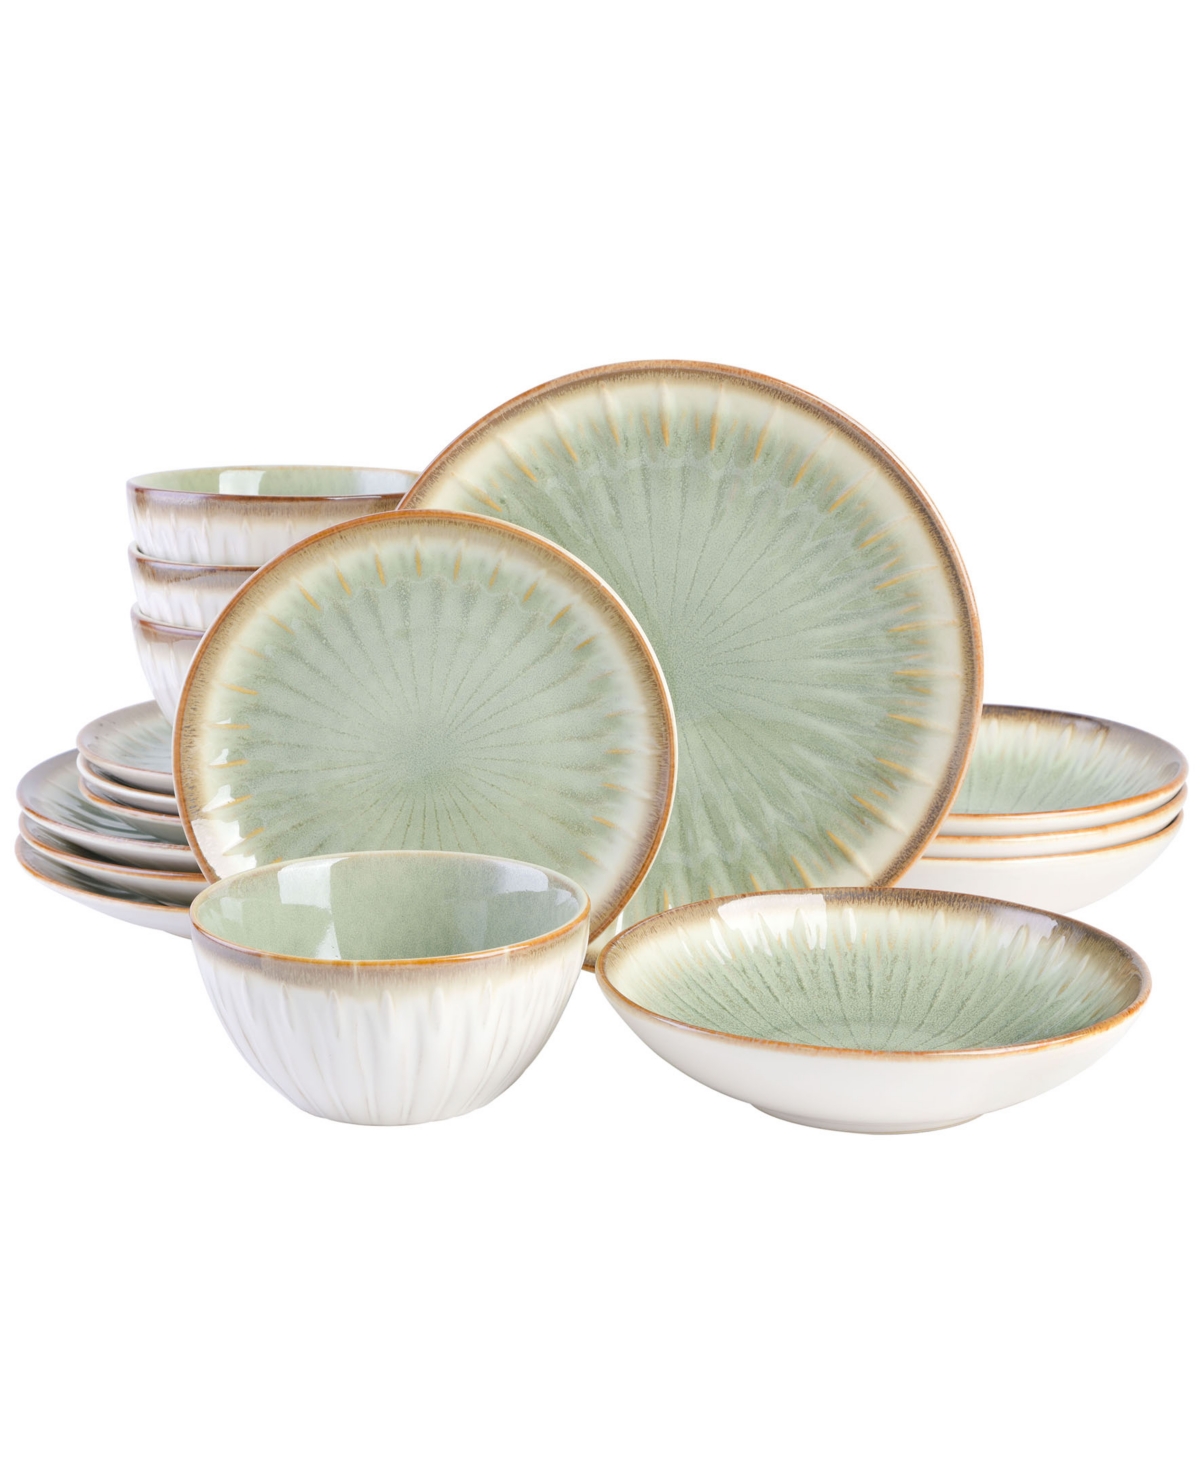 Elite Mayfair Bay Double Bowl Embossed Reactive, 16 Piece Dinnerware Set, Service for 4 - Blue